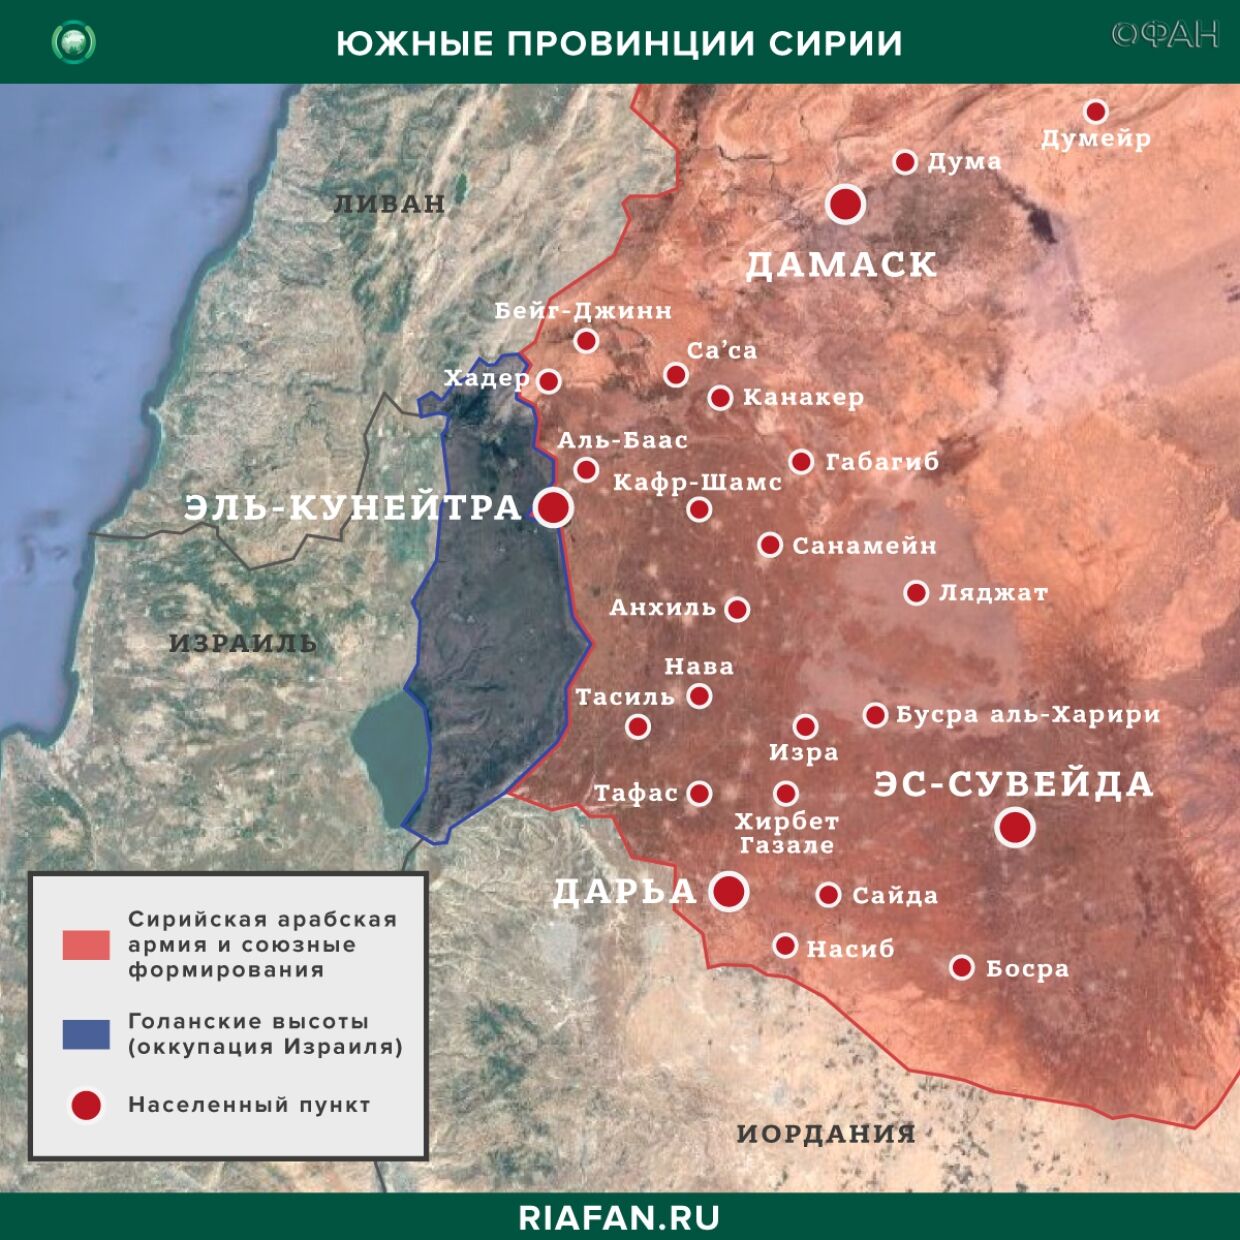 Syria the results of the day on 4 July 06.00: IDF accused of setting fire to fields on border with ATS, explosion on the way of the convoy of the US coalition